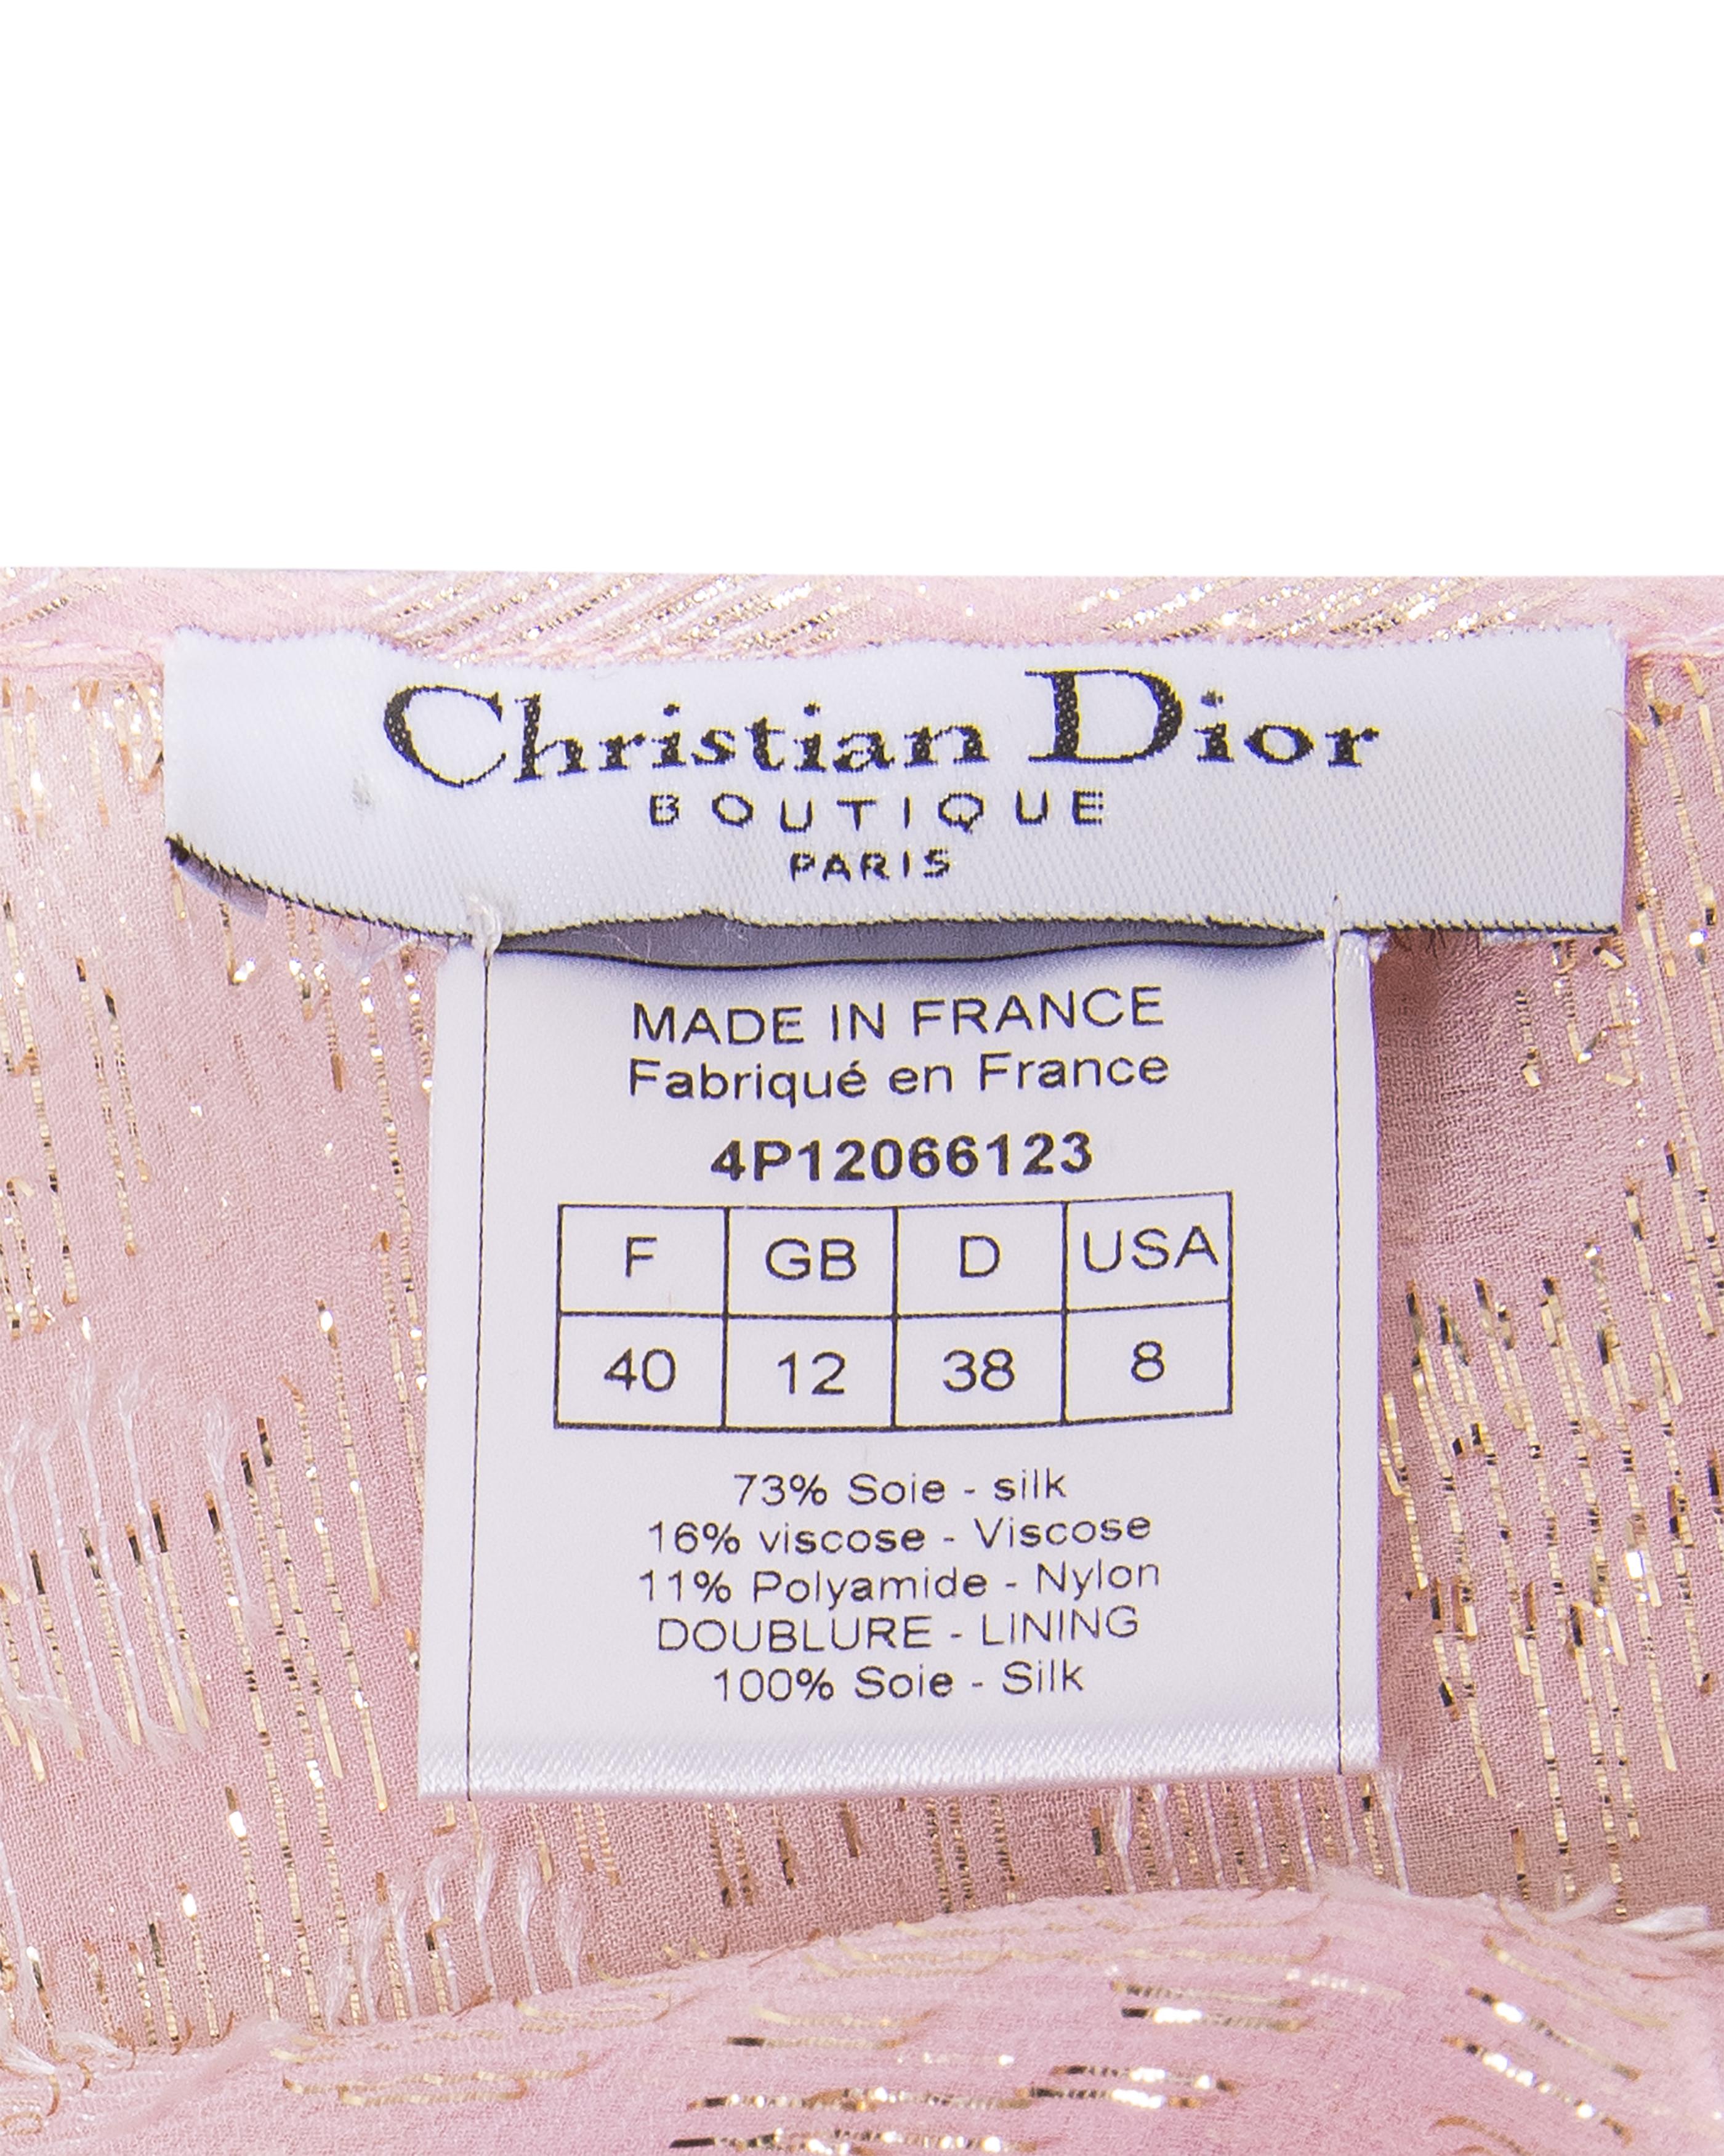 S/S 2004 Christian Dior by John Galliano Sheer Pink and Gold Ruffle Gown 10